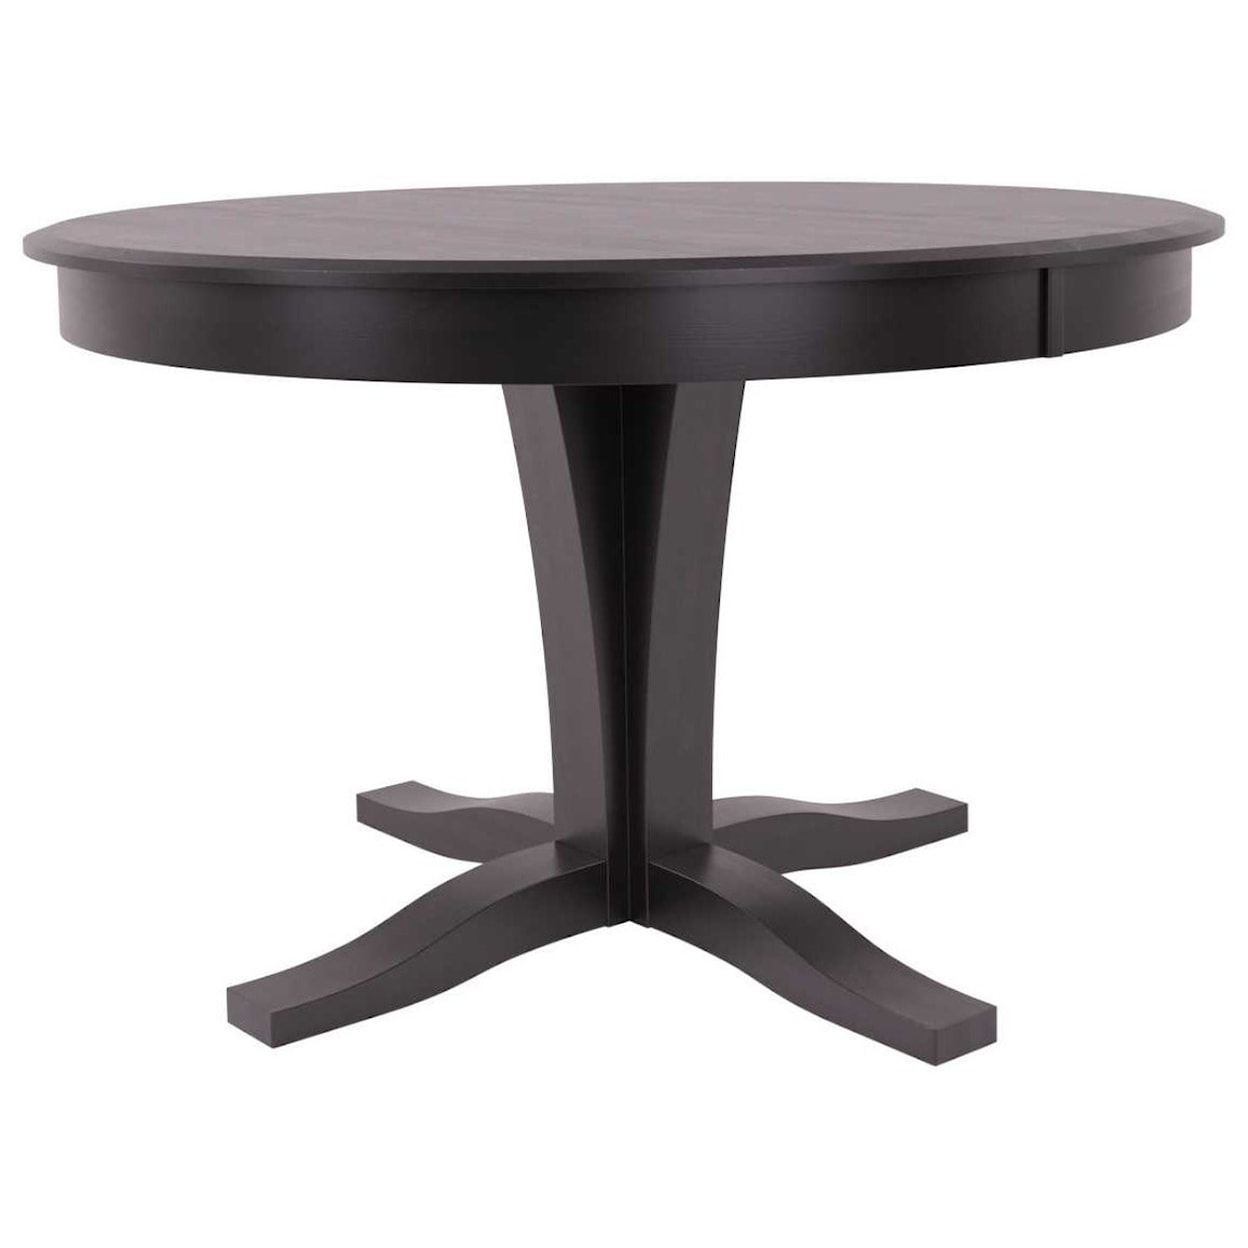 Canadel Gourmet Customizable Round Table w/ Pedestal